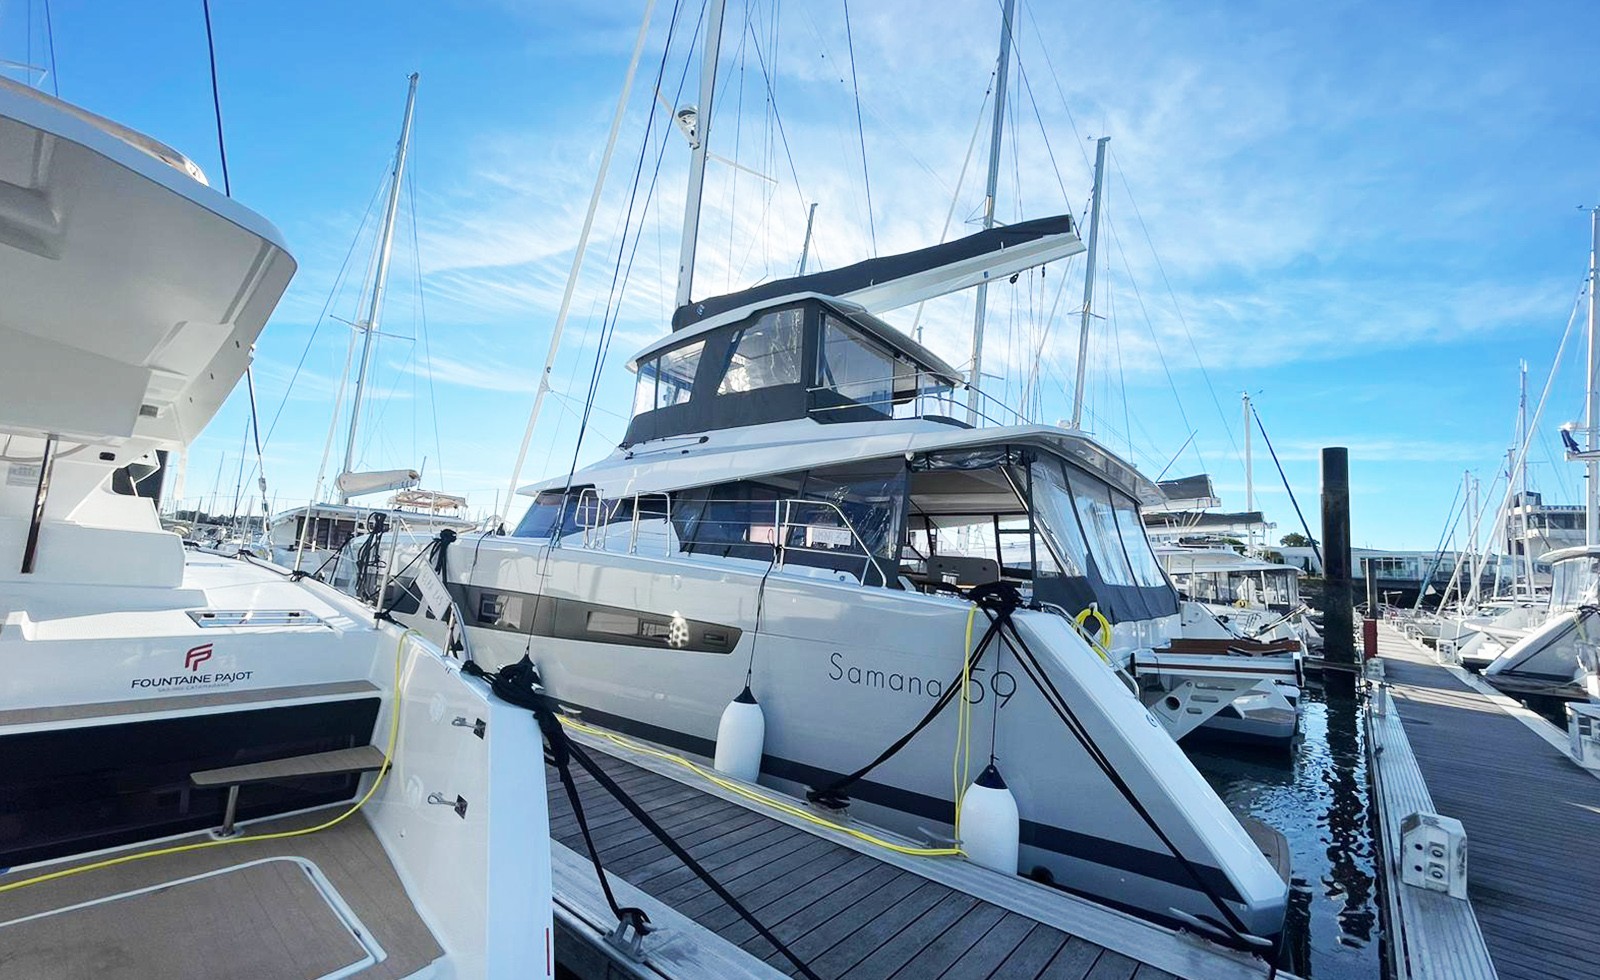 Soproyachts Delivers Brand New Fountaine Pajot Samana 59